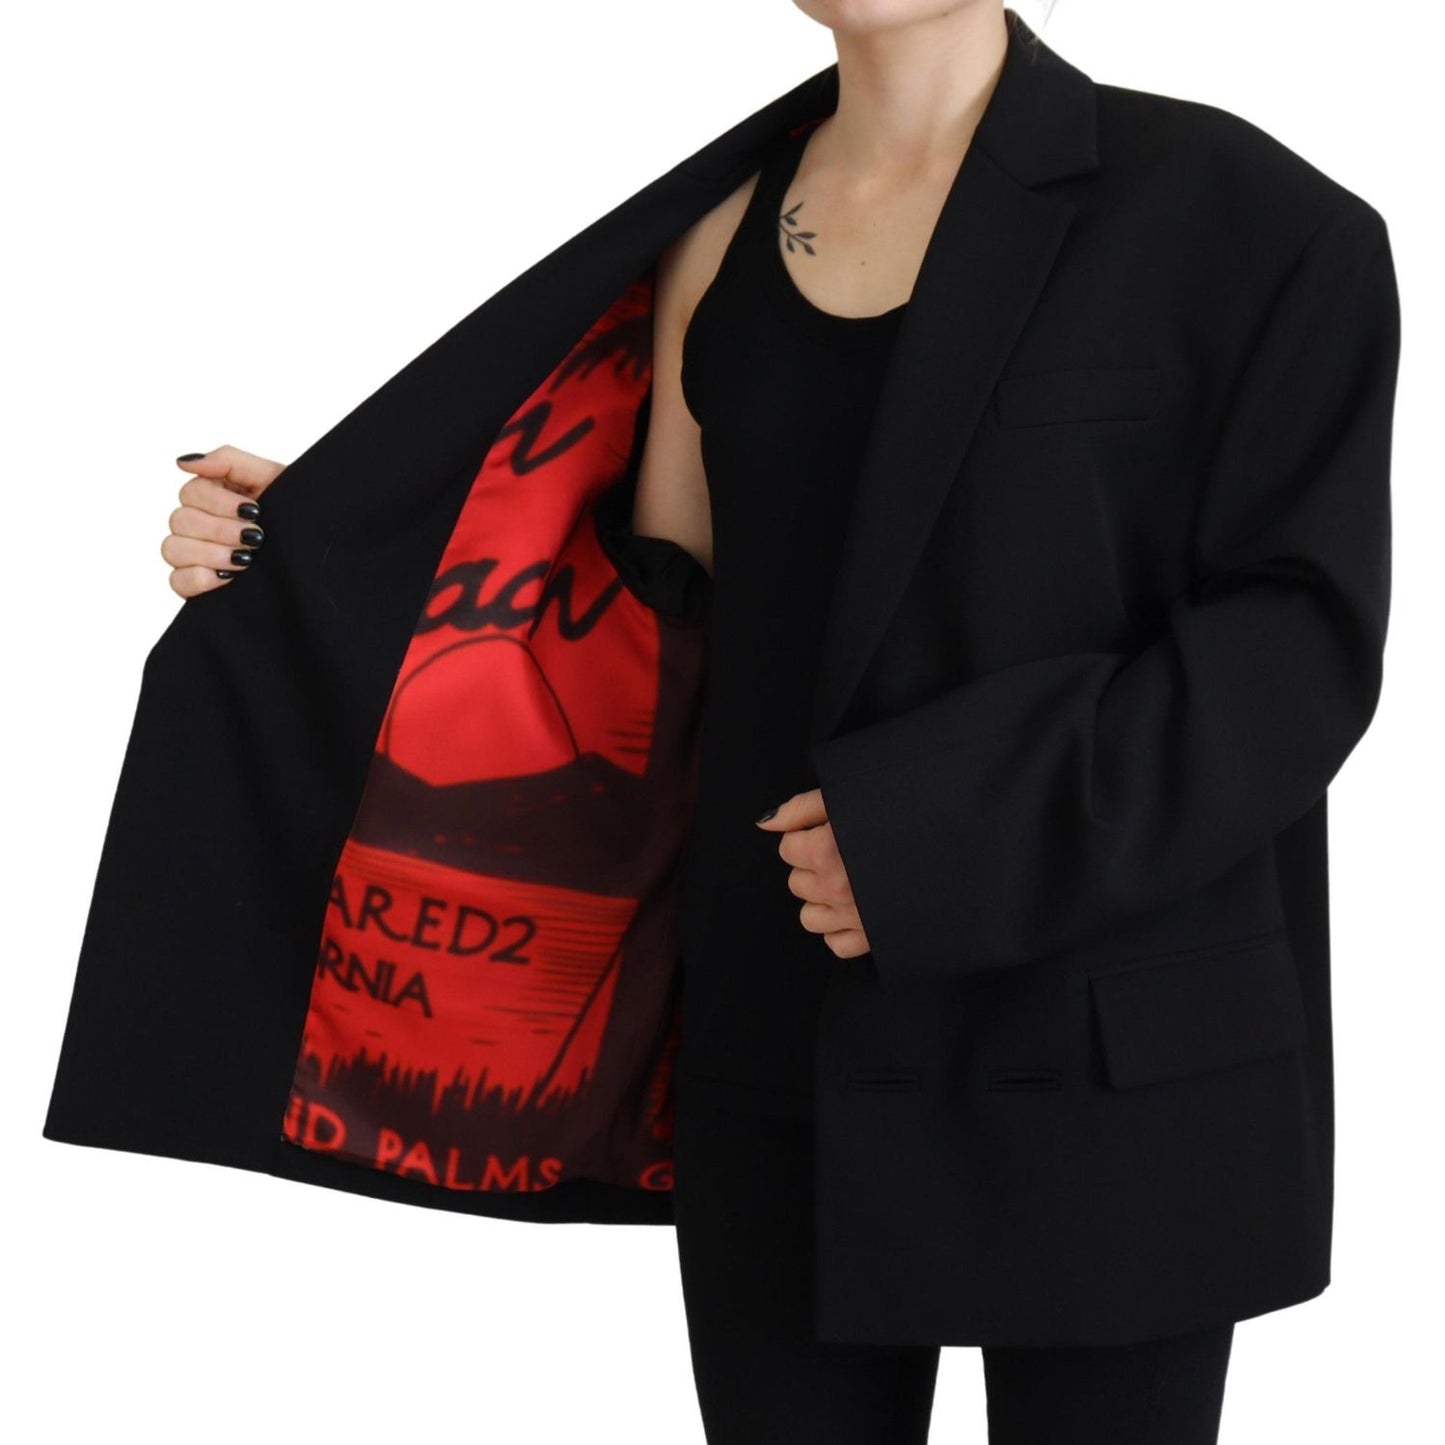 Dsquared² Black Double Breasted Coat Blazer Jacket black-double-breasted-coat-blazer-jacket-1